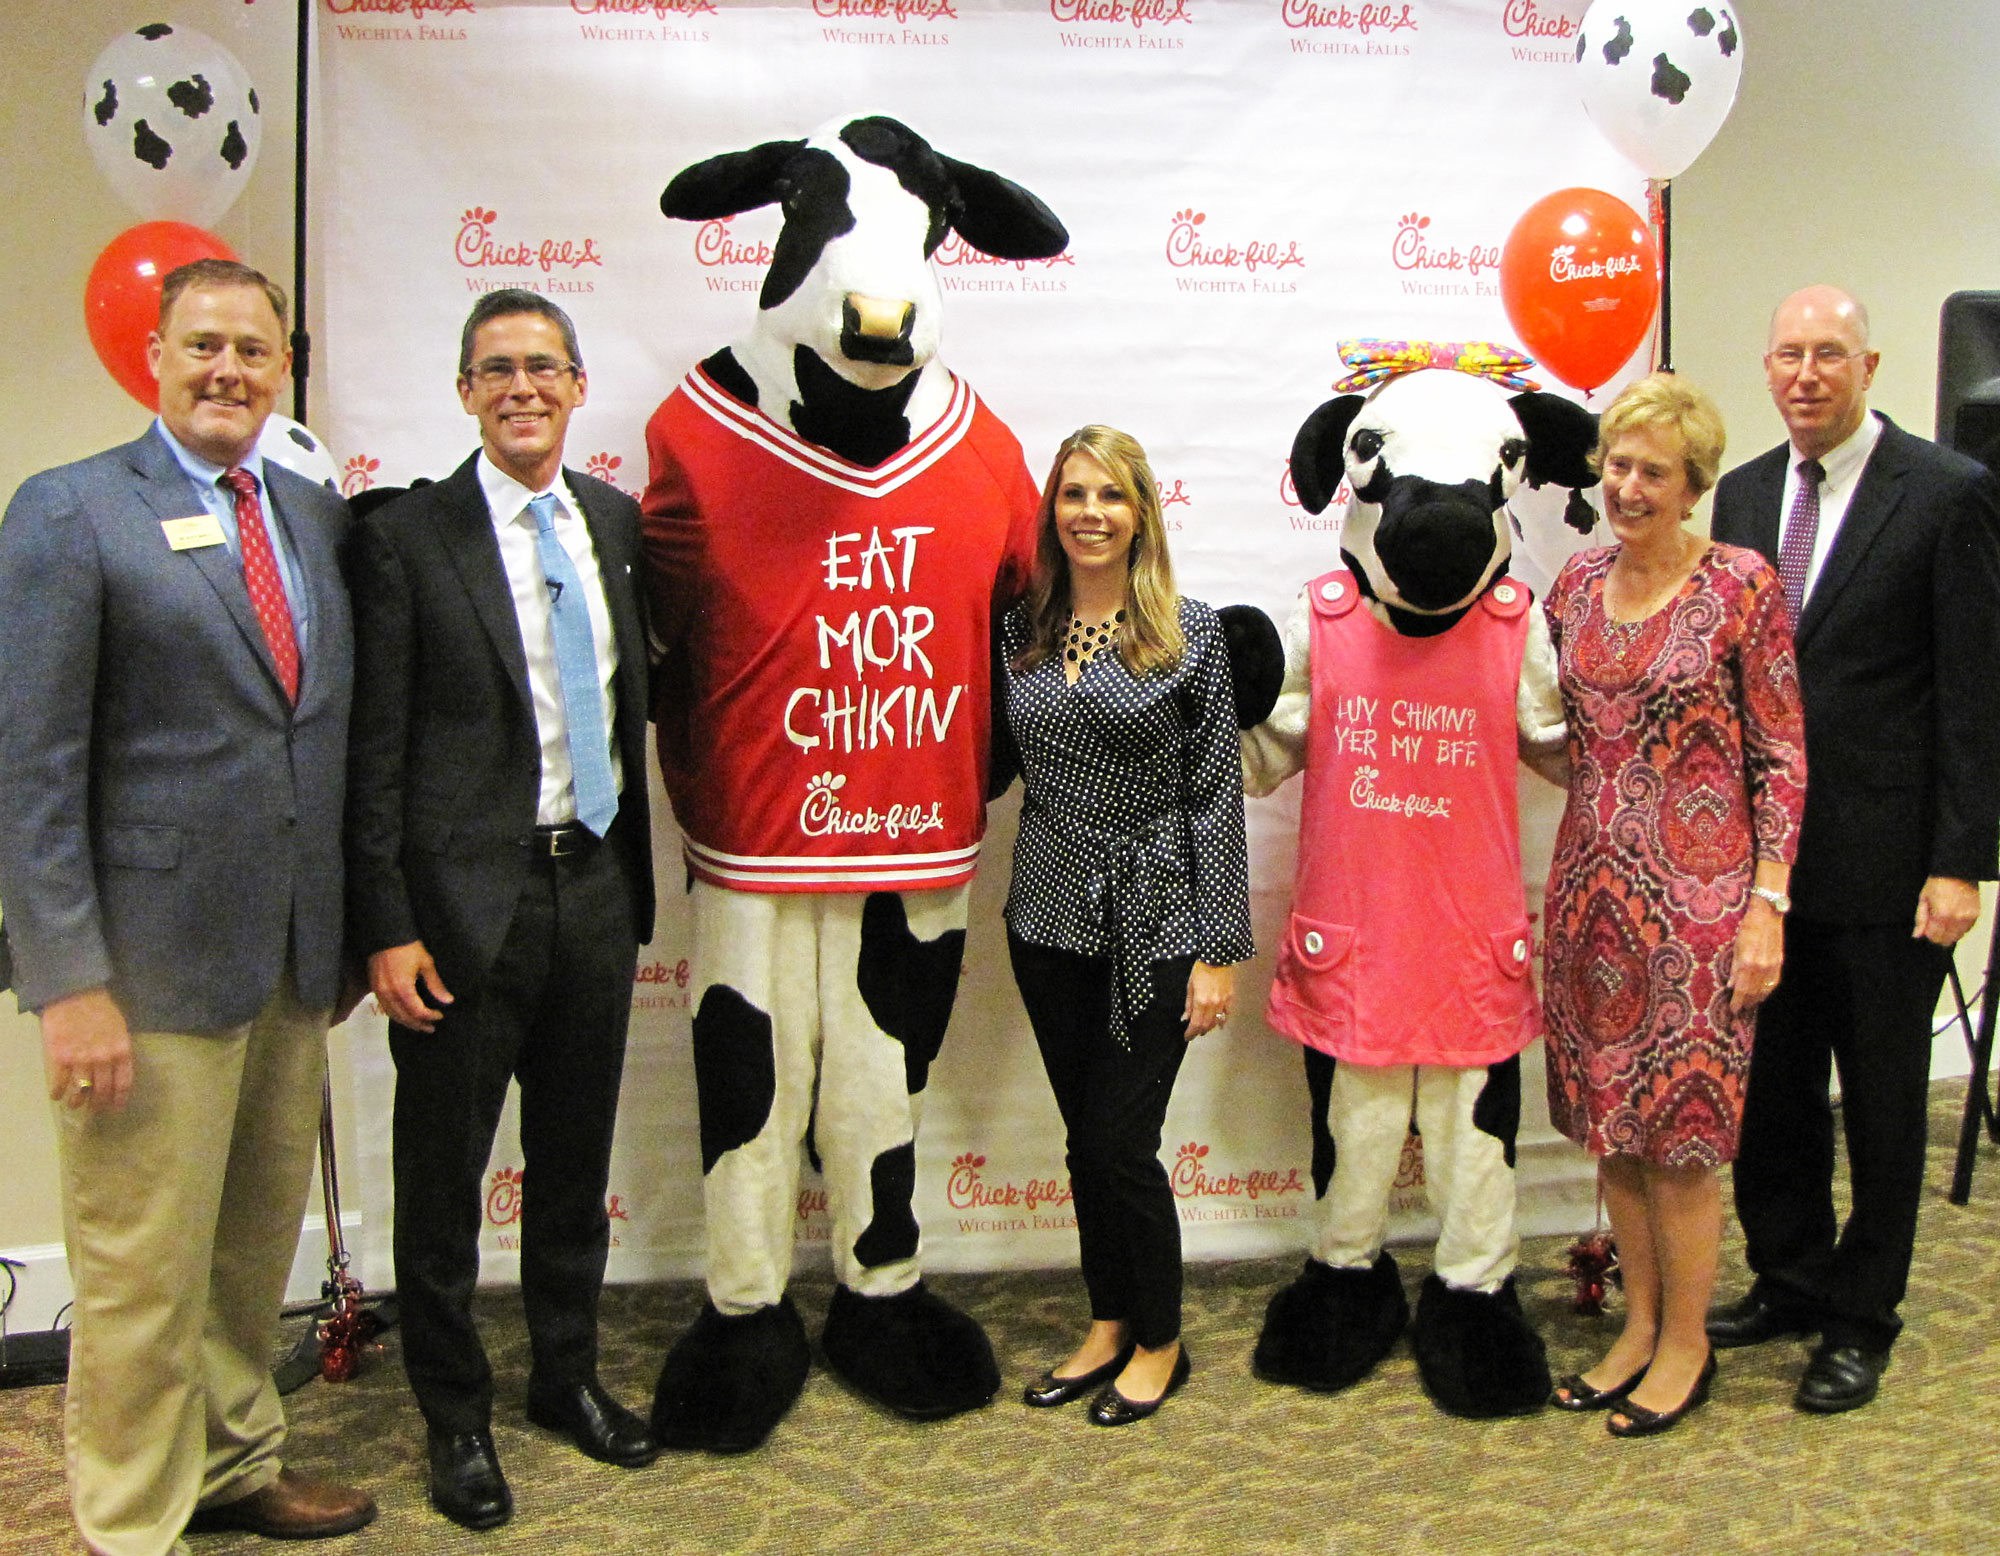 Dr. Scott Manley, Dr. Dwain Cox, Mrs. Mary Beth Leach, Dr. Suzanne Shipley, and Dr. Jeff Stambaugh standing with Chick-fil-A cows at the i.d.e.a.WF luncheon